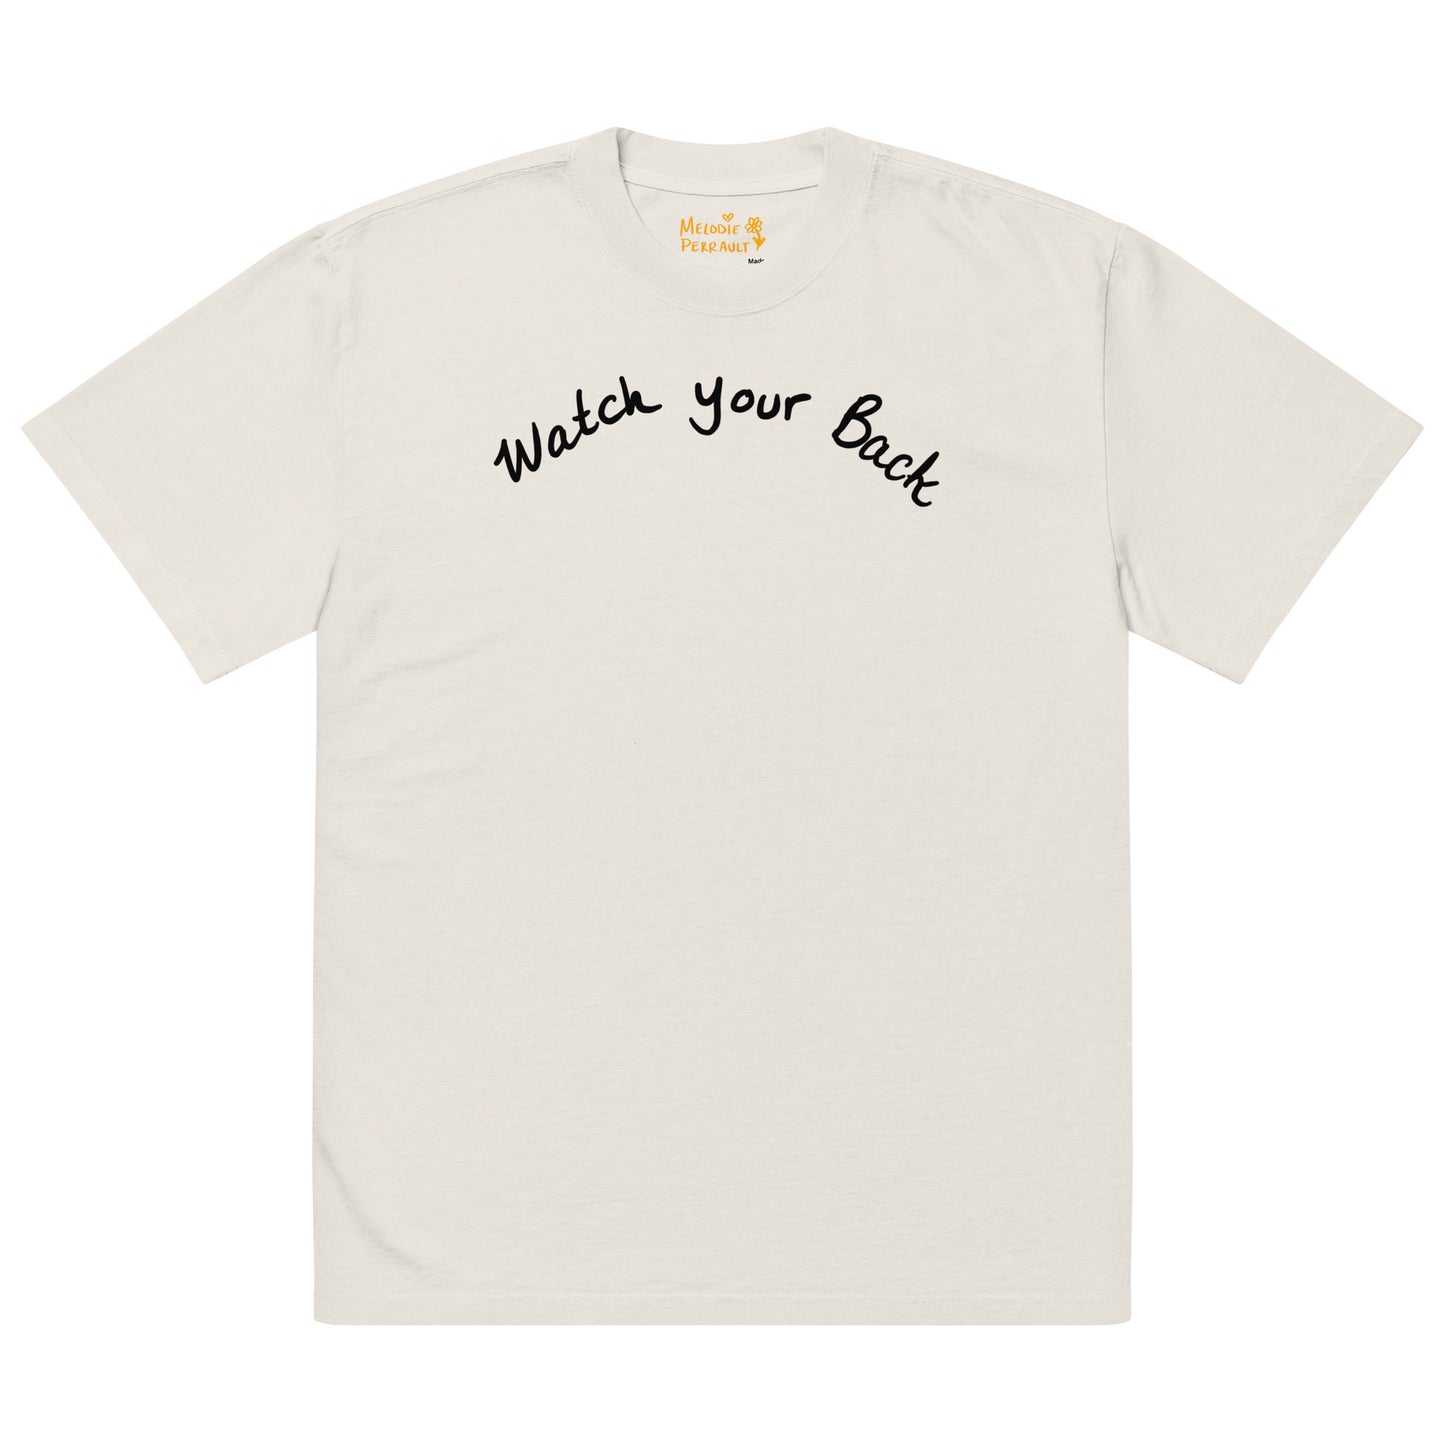 " Watch Your Back " Oversized faded t-shirt